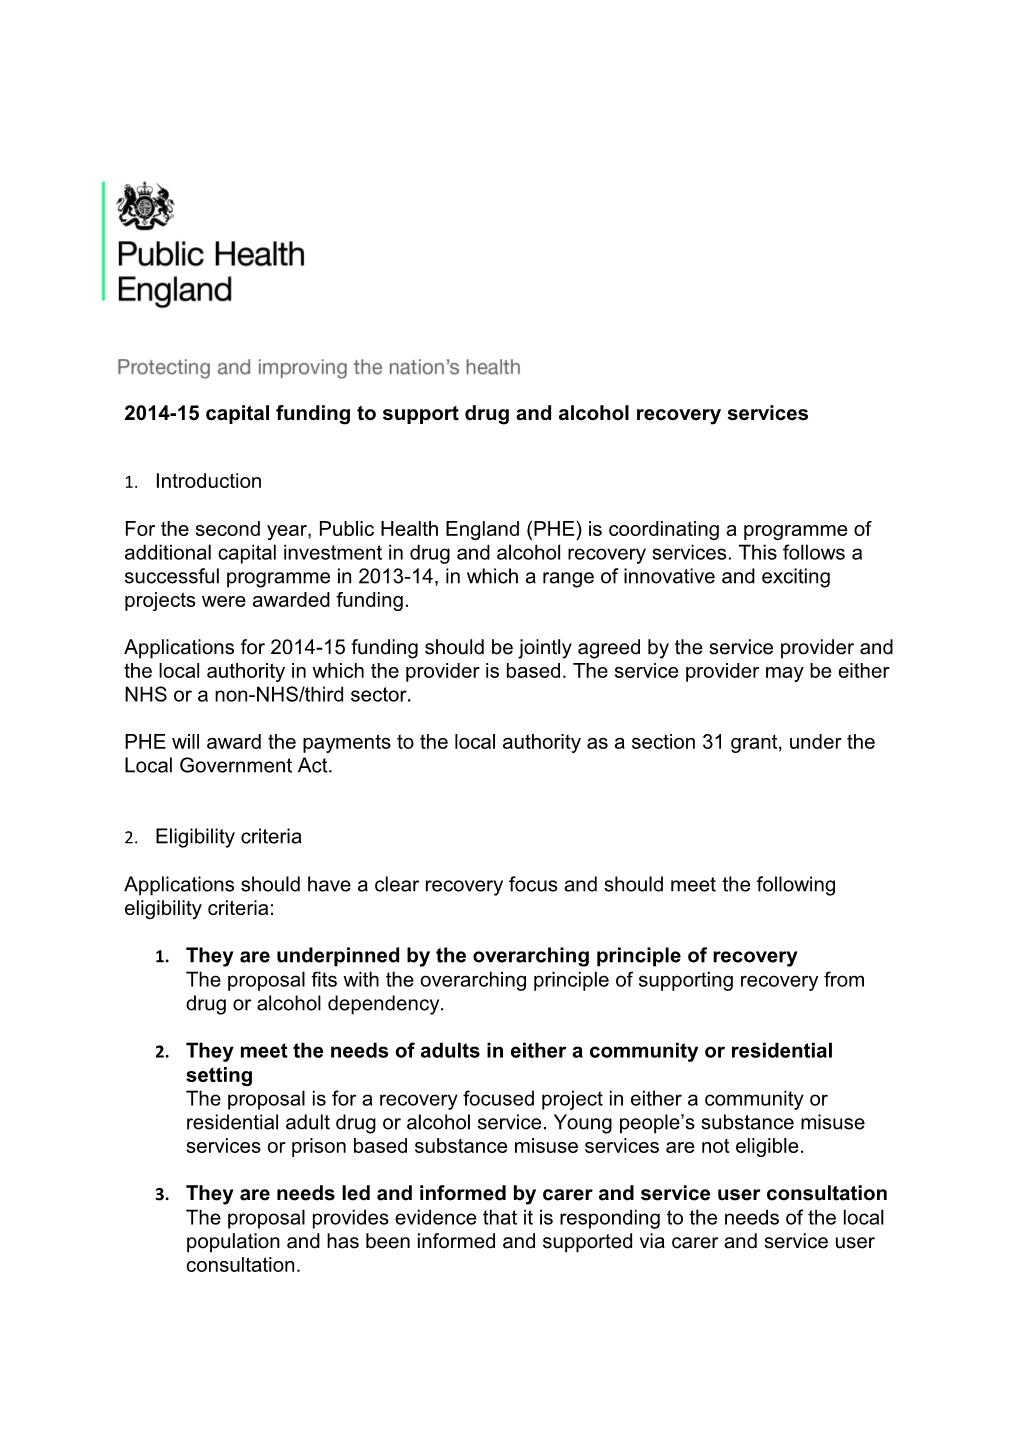 2014-15 Capital Funding to Support Drug and Alcohol Recovery Services